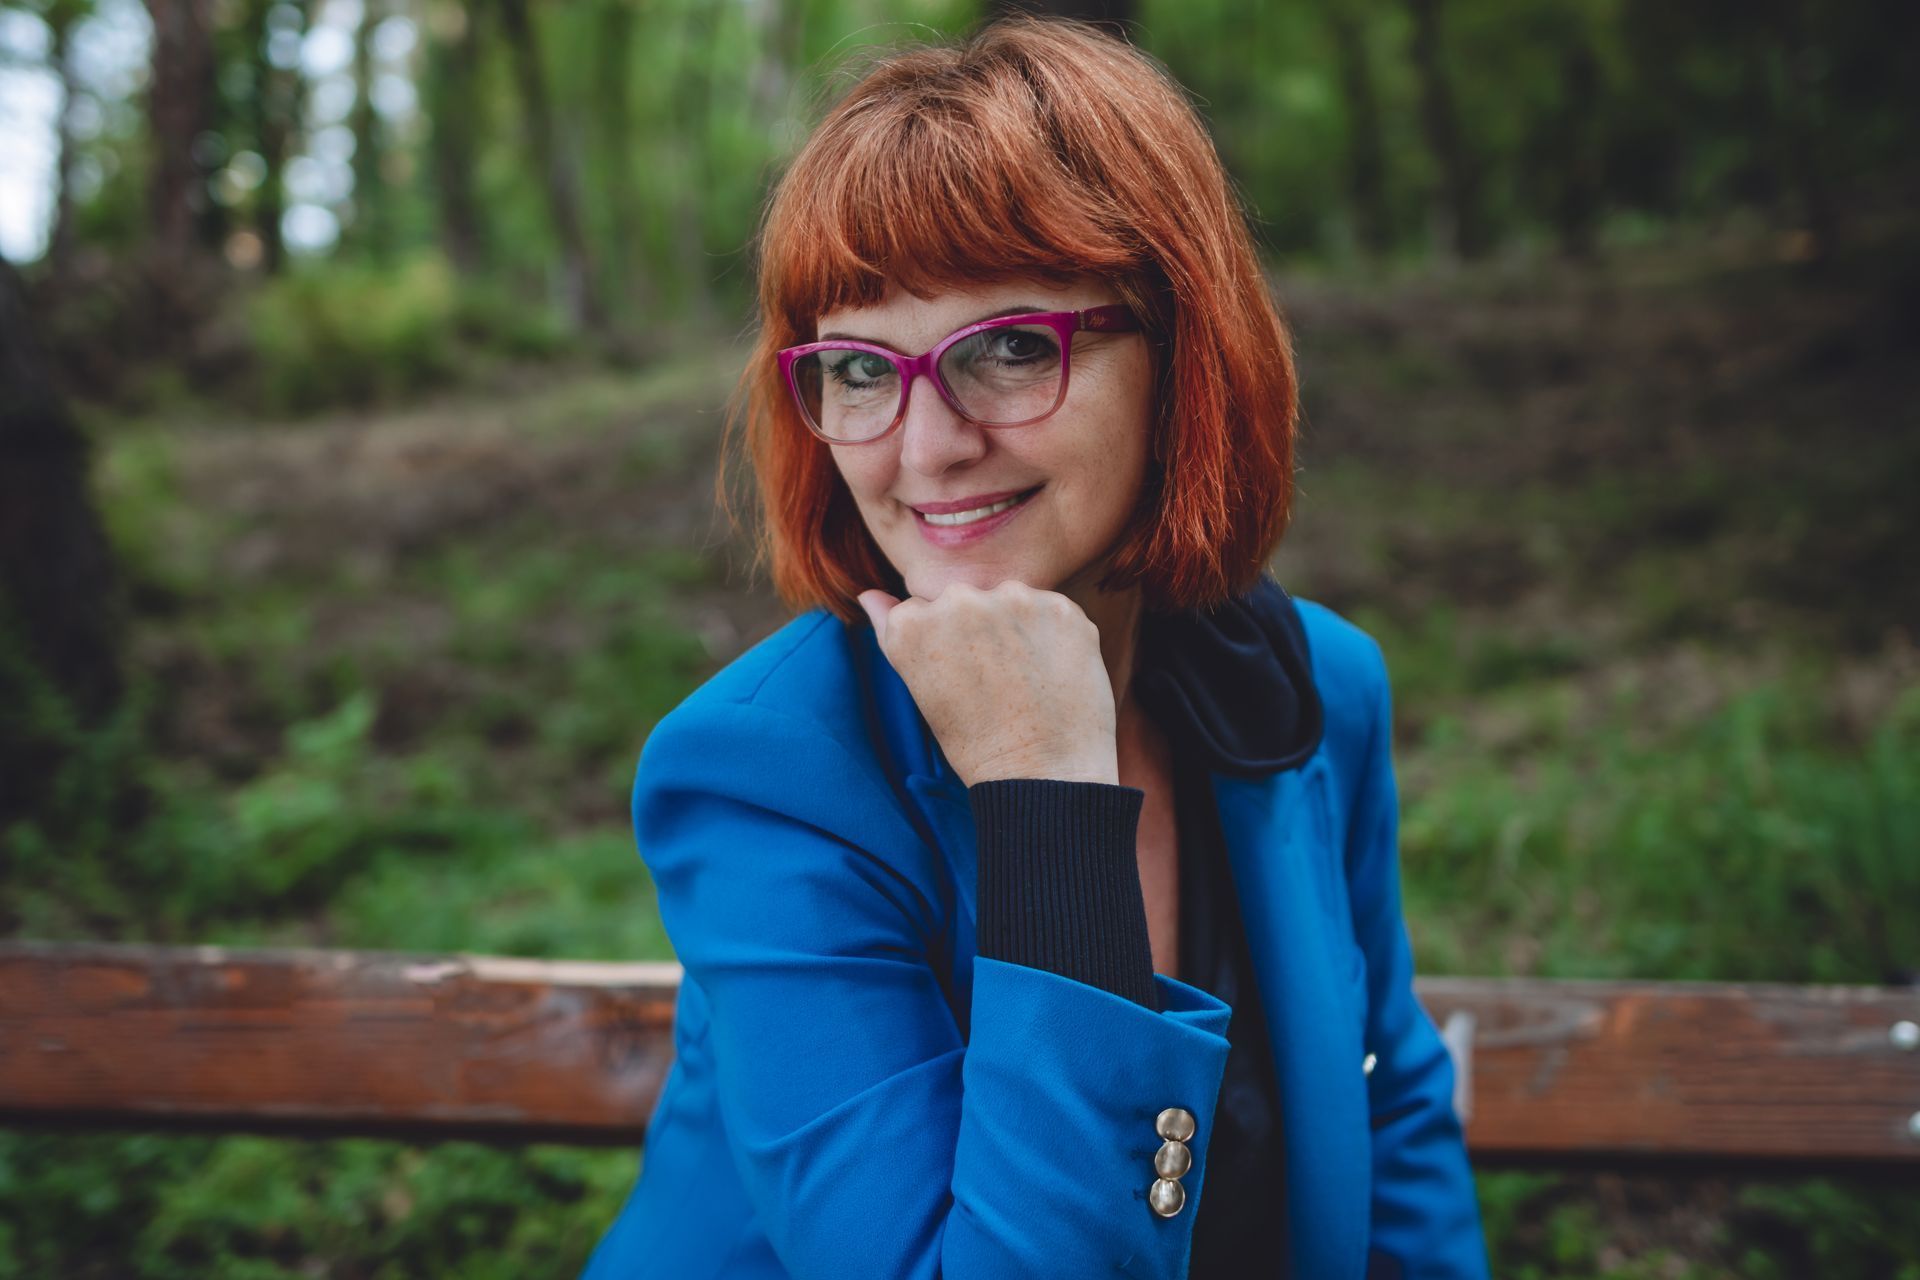 red hair women marketing consultant is sitting on the bench with hand below her chin